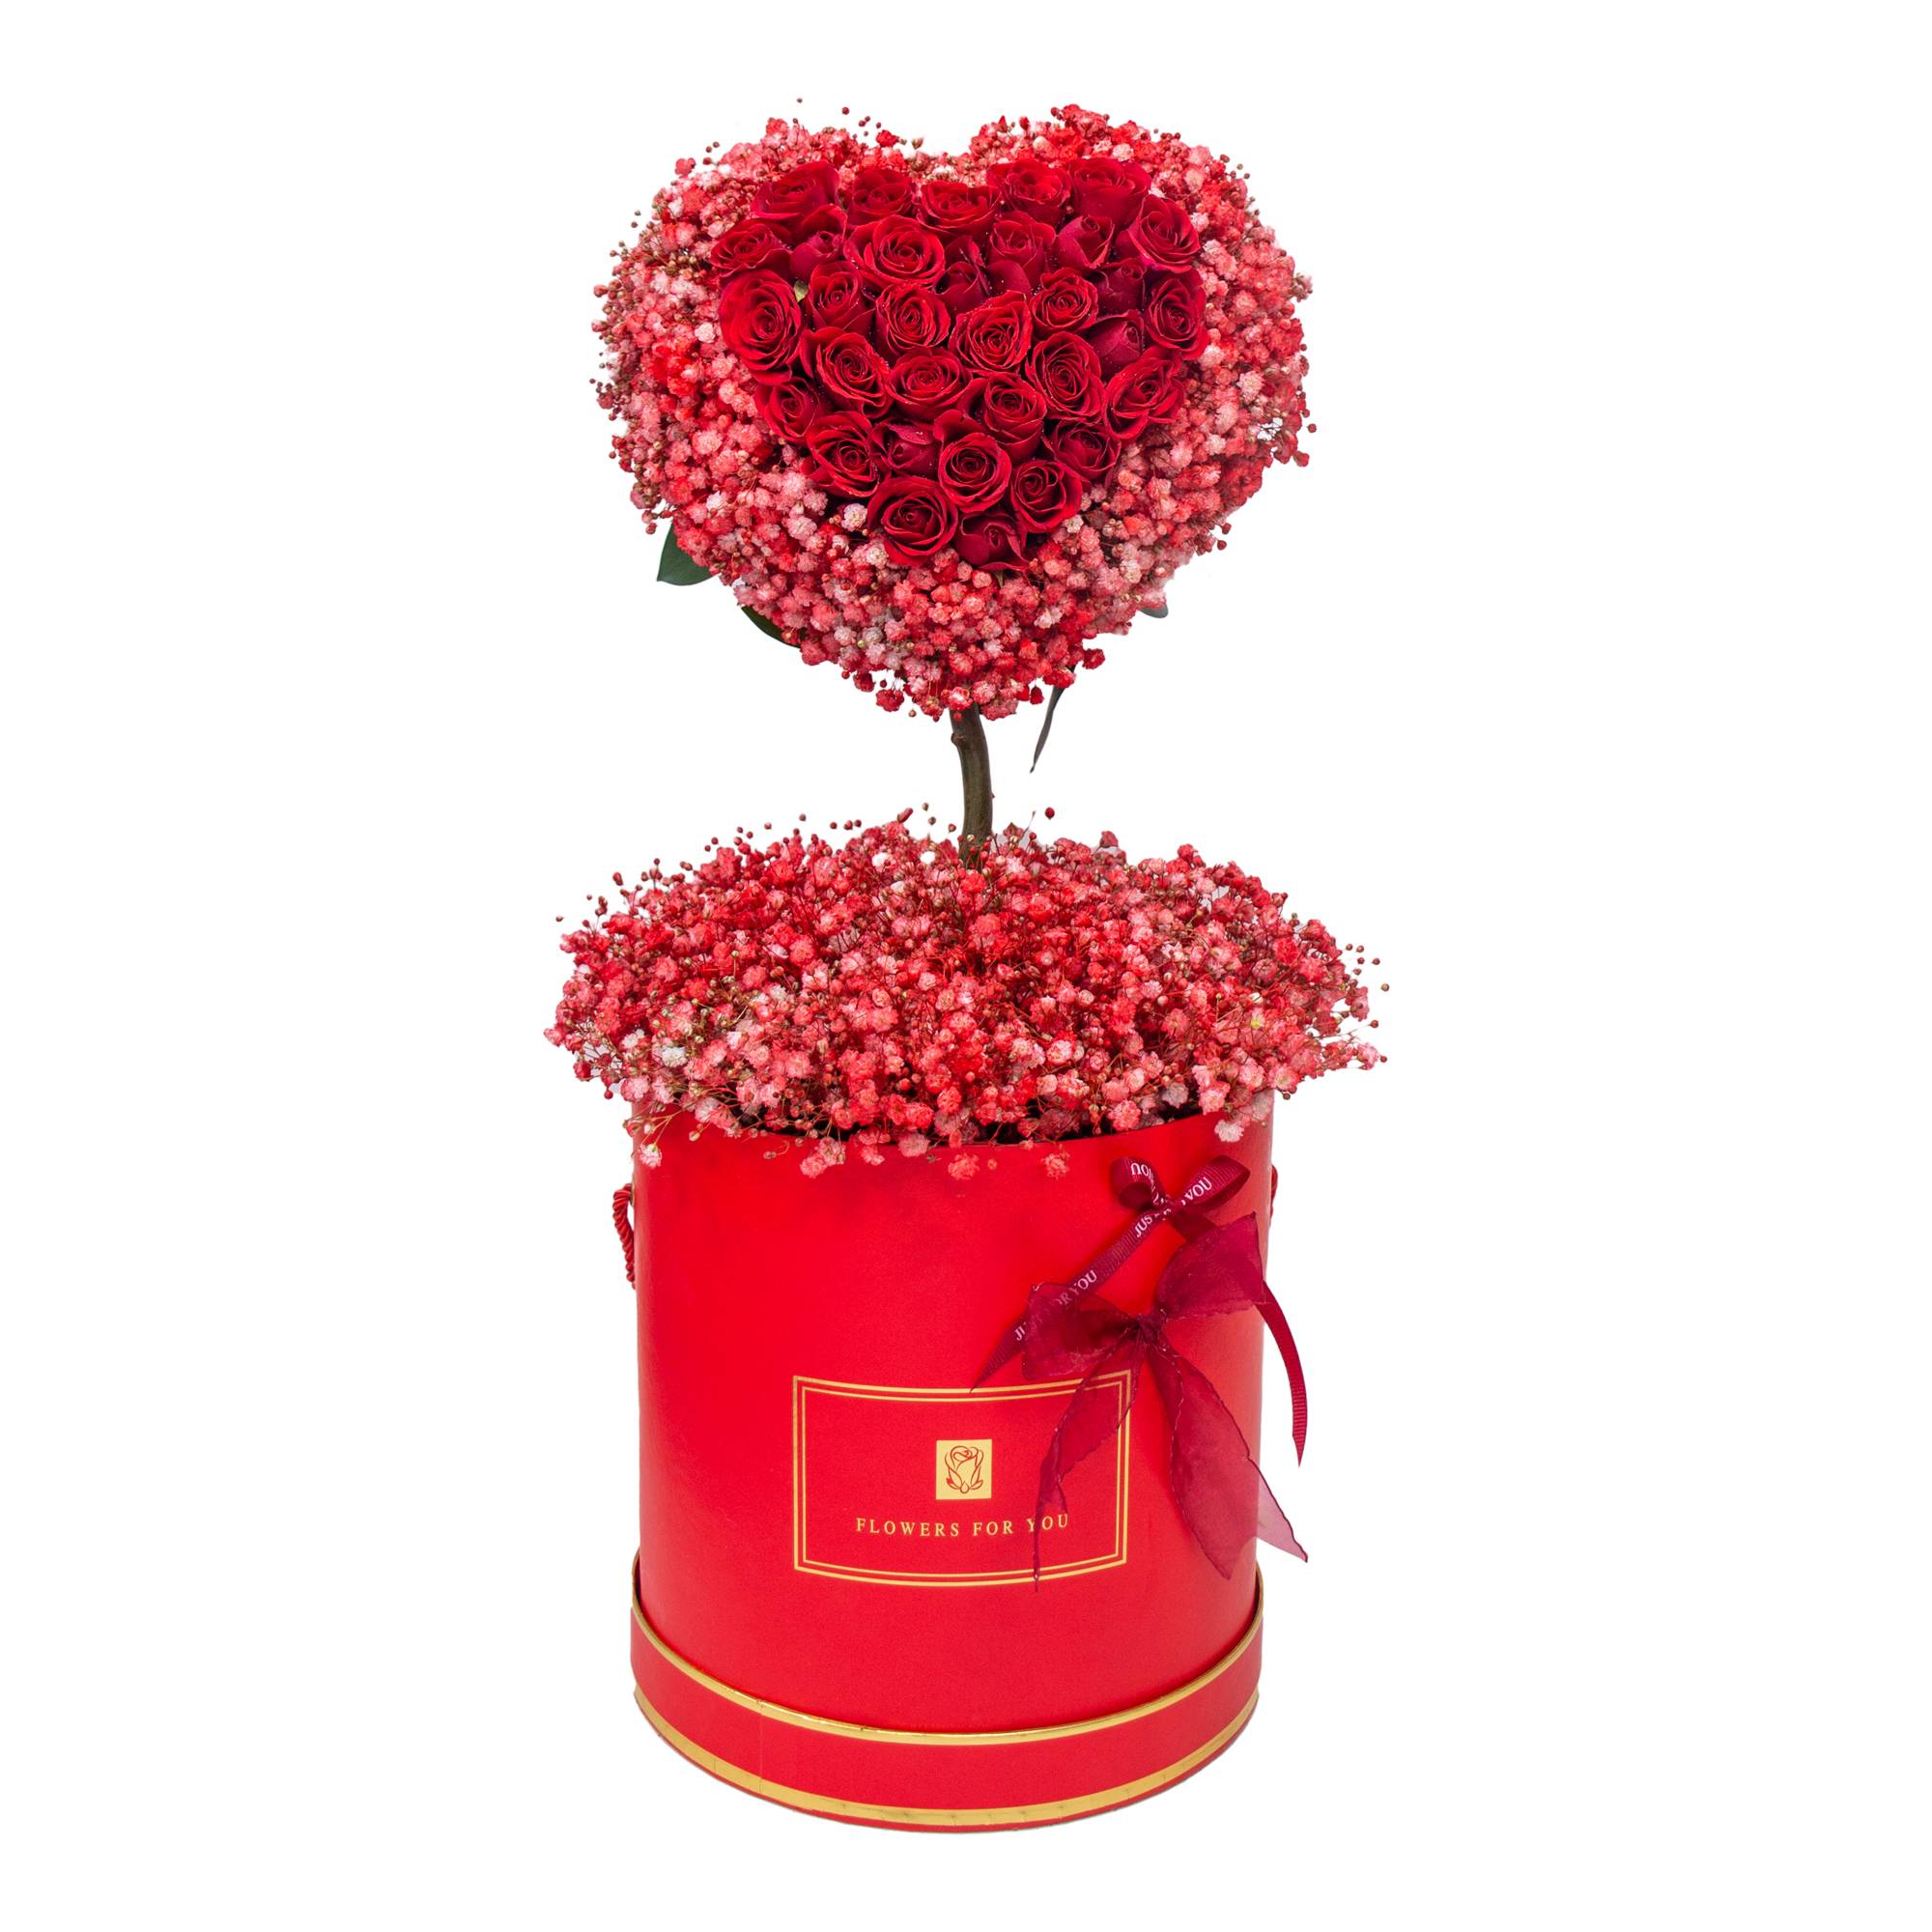 red-roses-gypso-valentines-bouquet.jpg